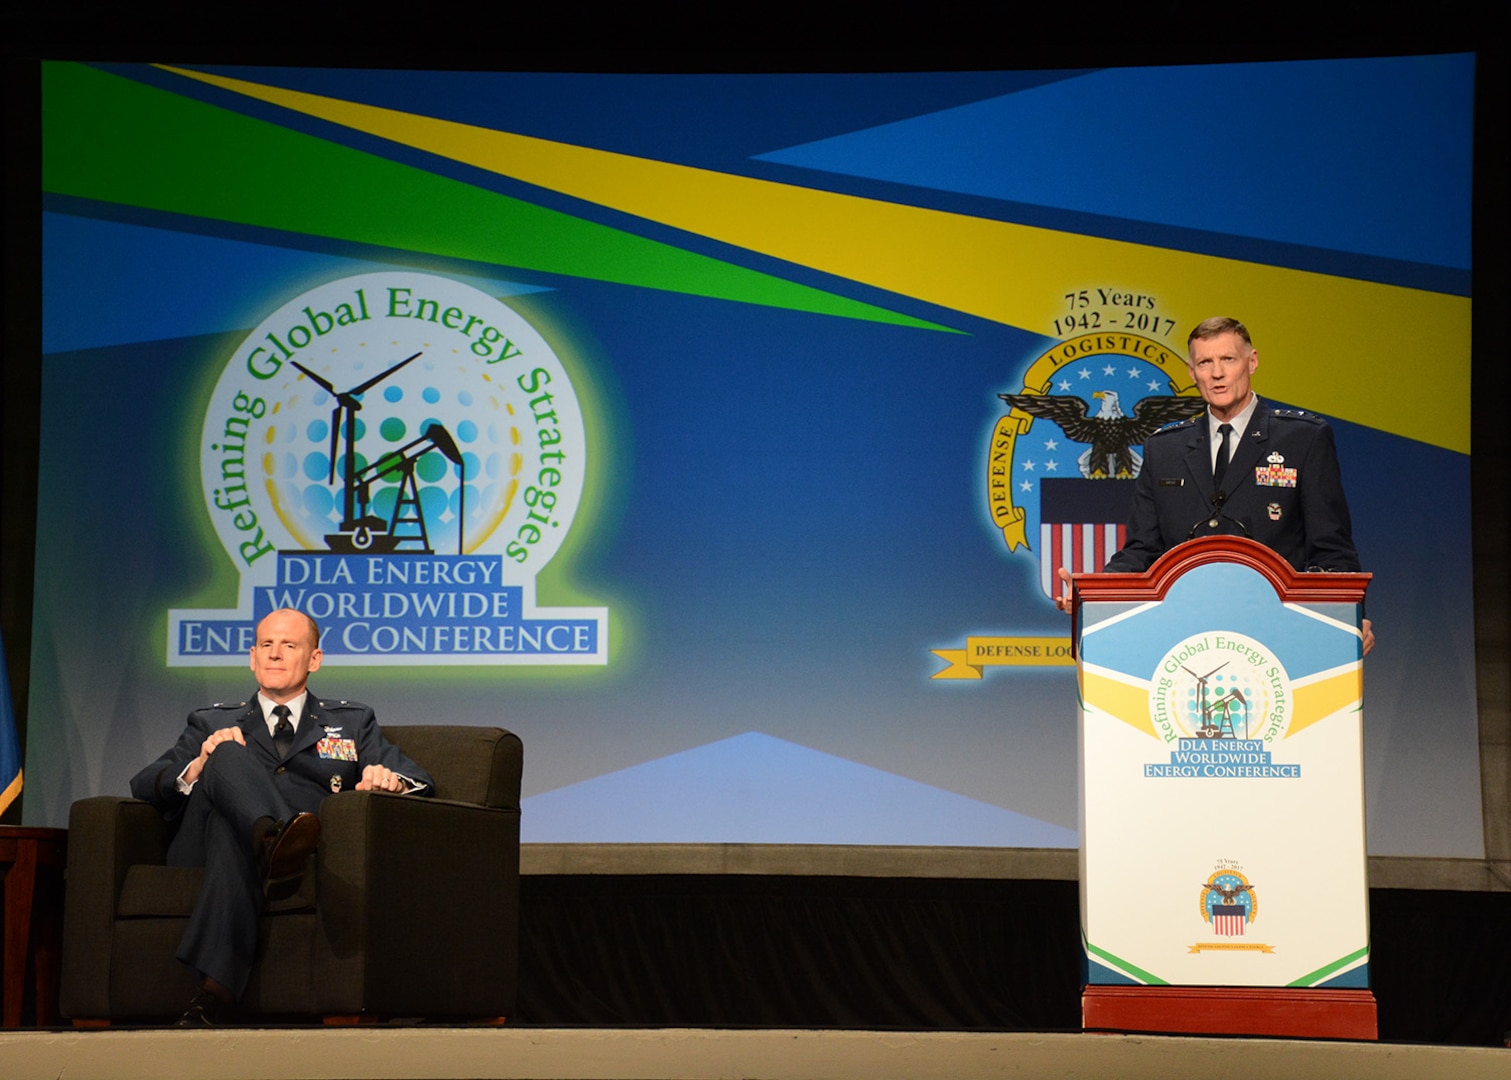 DLA Director Air Force Lt. Gen. Andy Busch provided opening remarks at the Worldwide Energy Conference trade show ceremony with DLA Energy Commander Air Force Brig. Gen. Martin Chapin looking on.